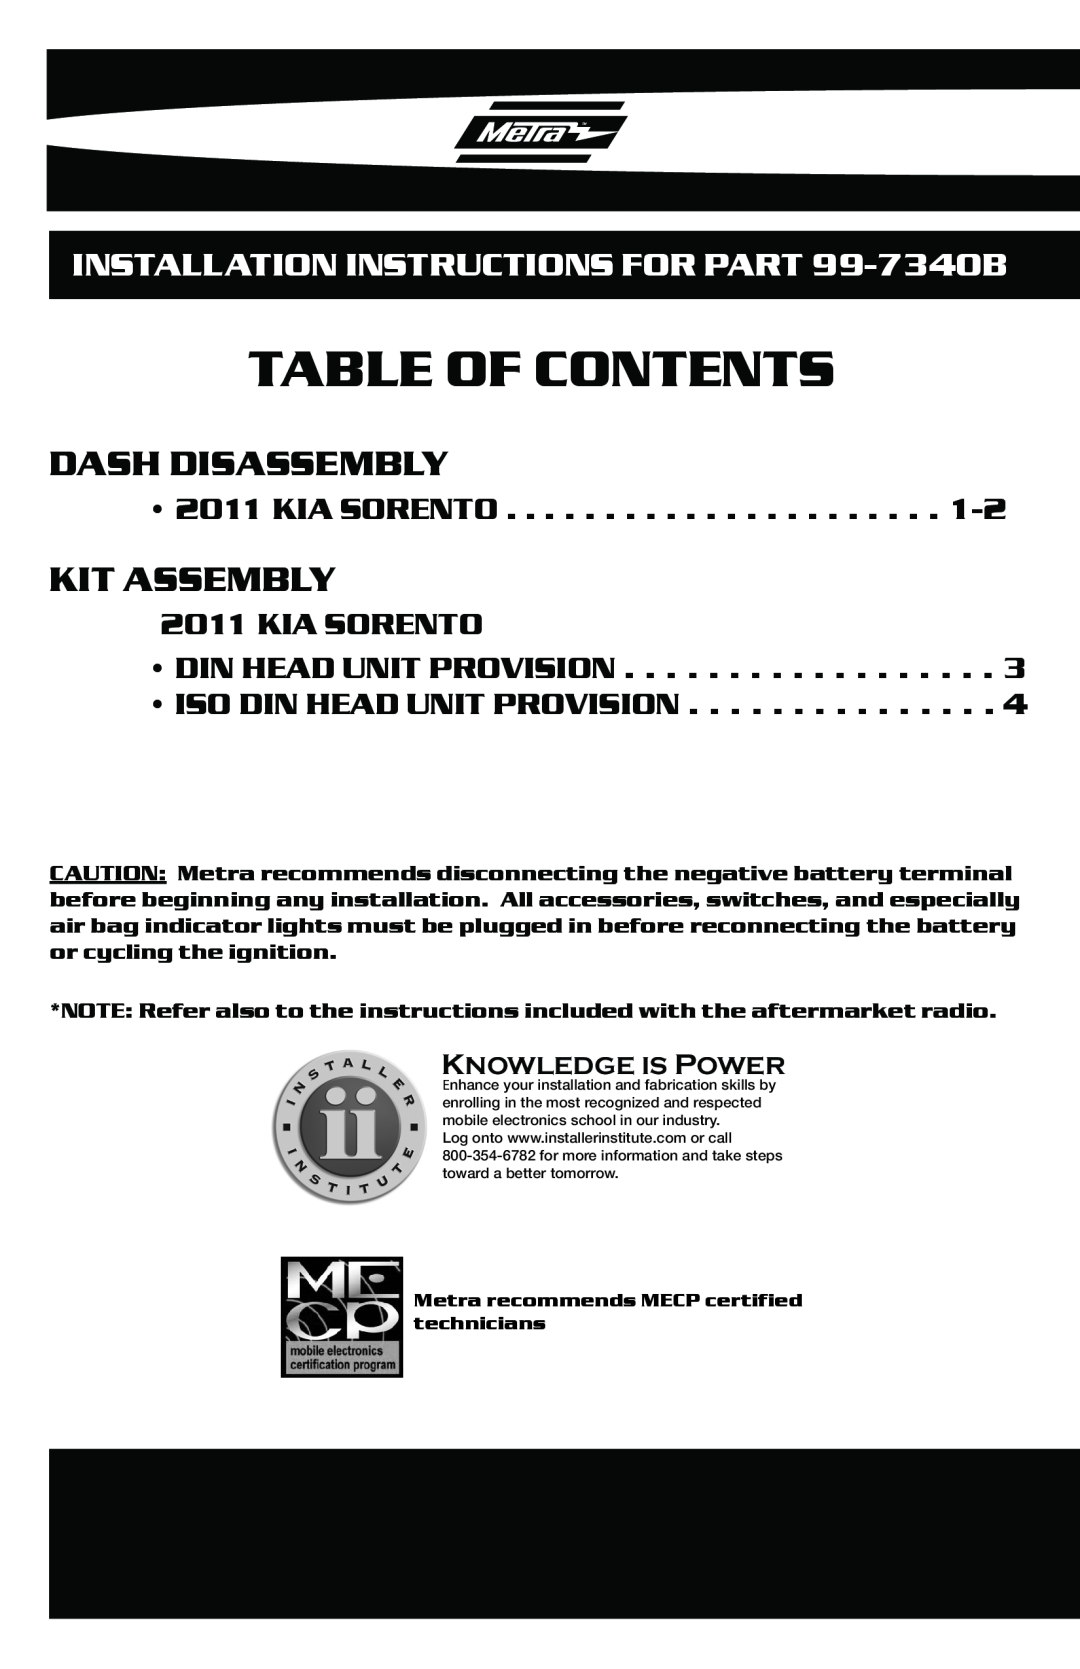 Metra Electronics Table Of Contents, Dash Disassembly, Kit Assembly, INSTALLATION INSTRUCTIONS FOR PART 99-7340B 